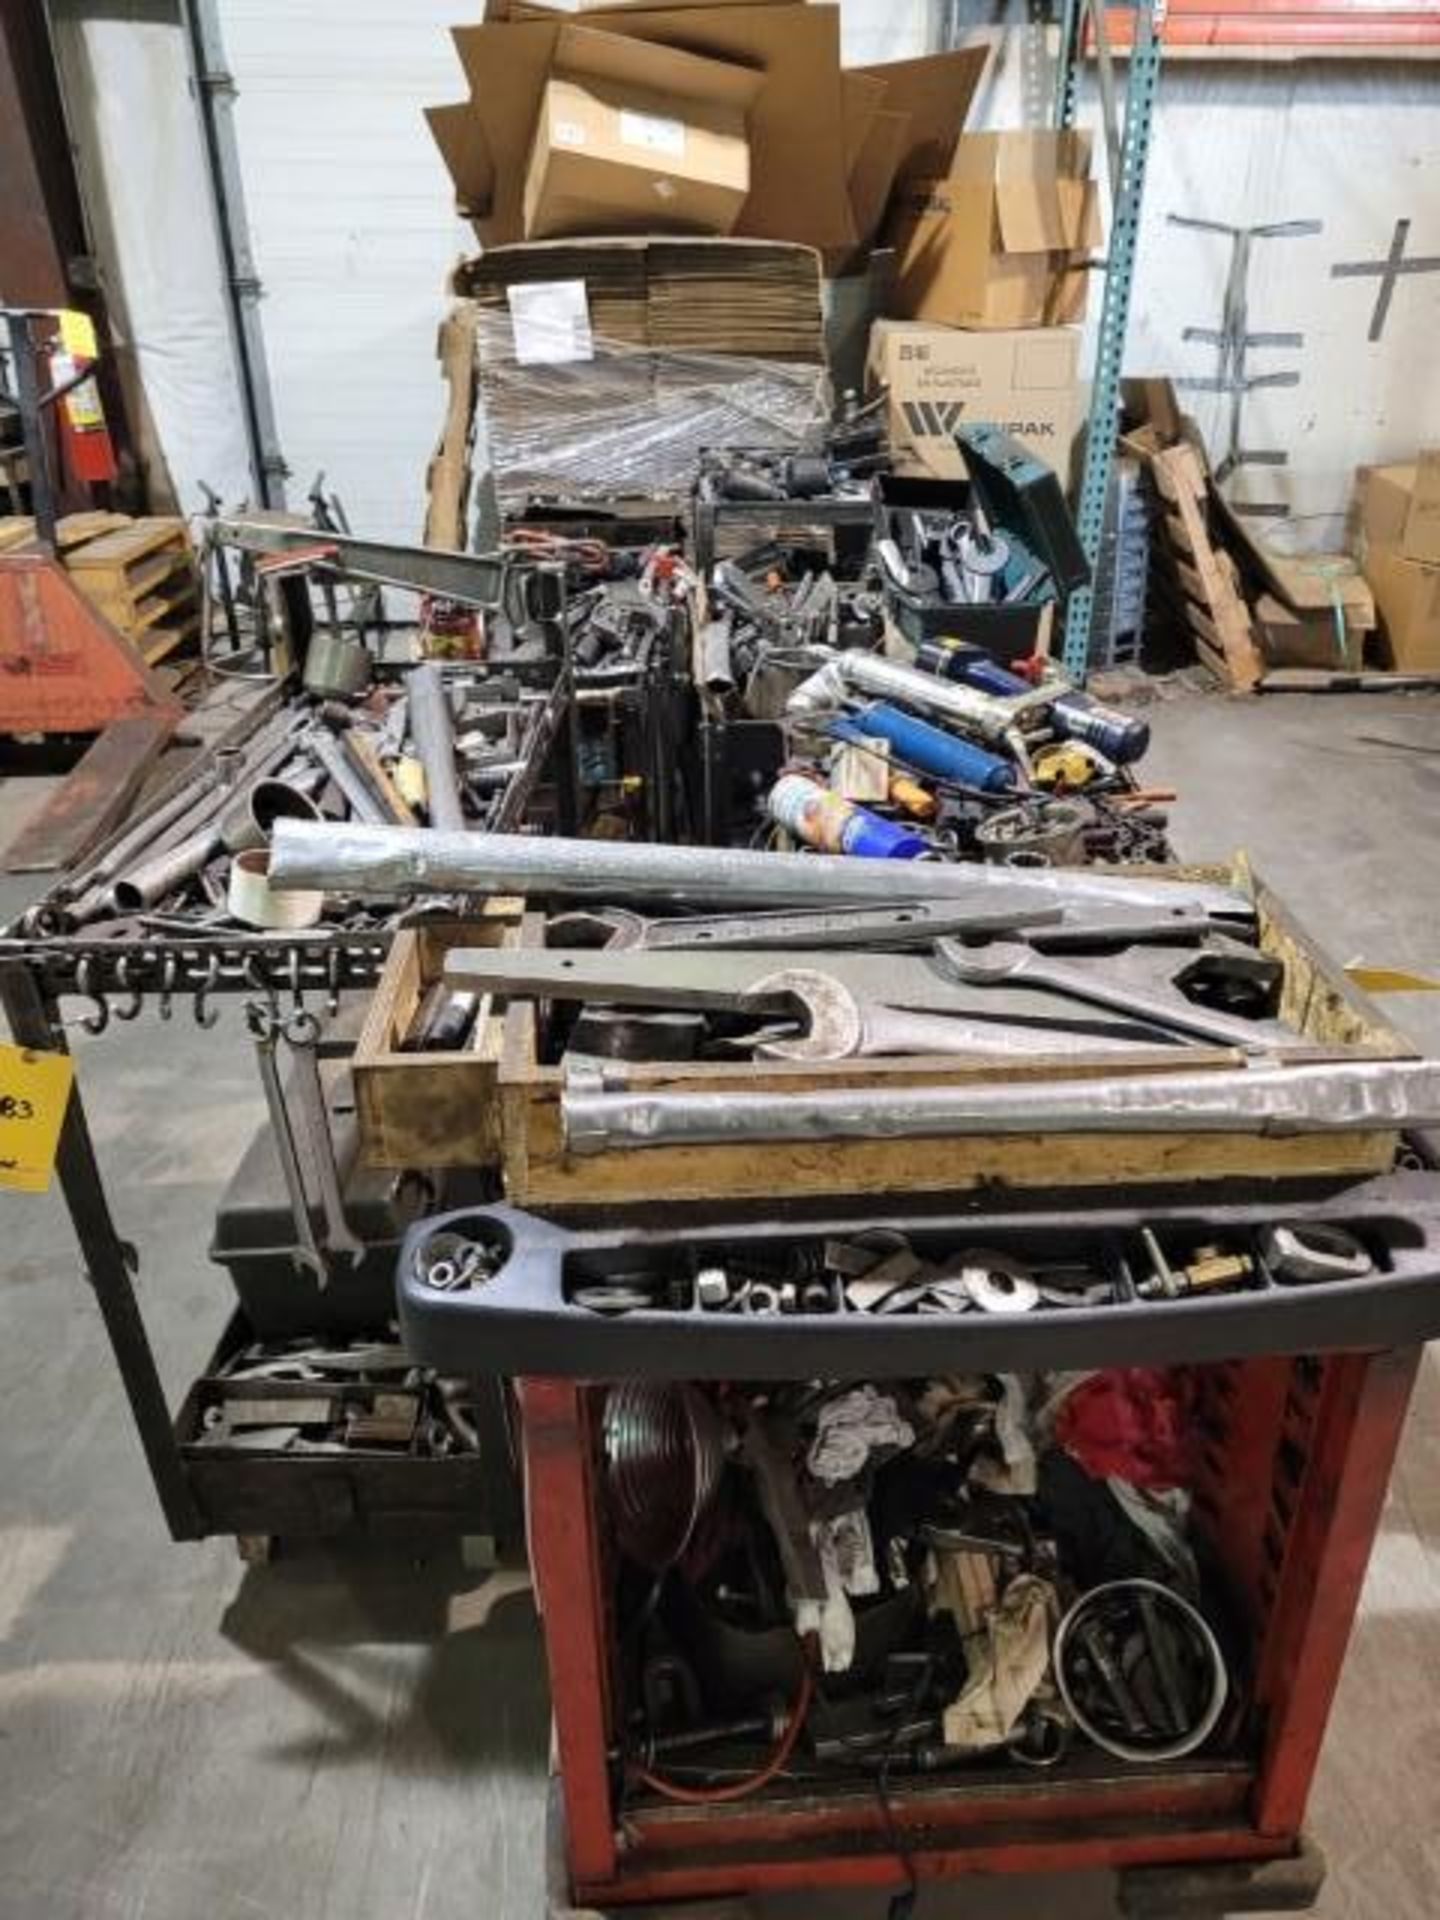 LOT: (6) Utility Carts w/ Hand Tools Consisting of: Sockets, Wrenches, Tool Boxes, Handles, Nuts, Bo - Image 3 of 5